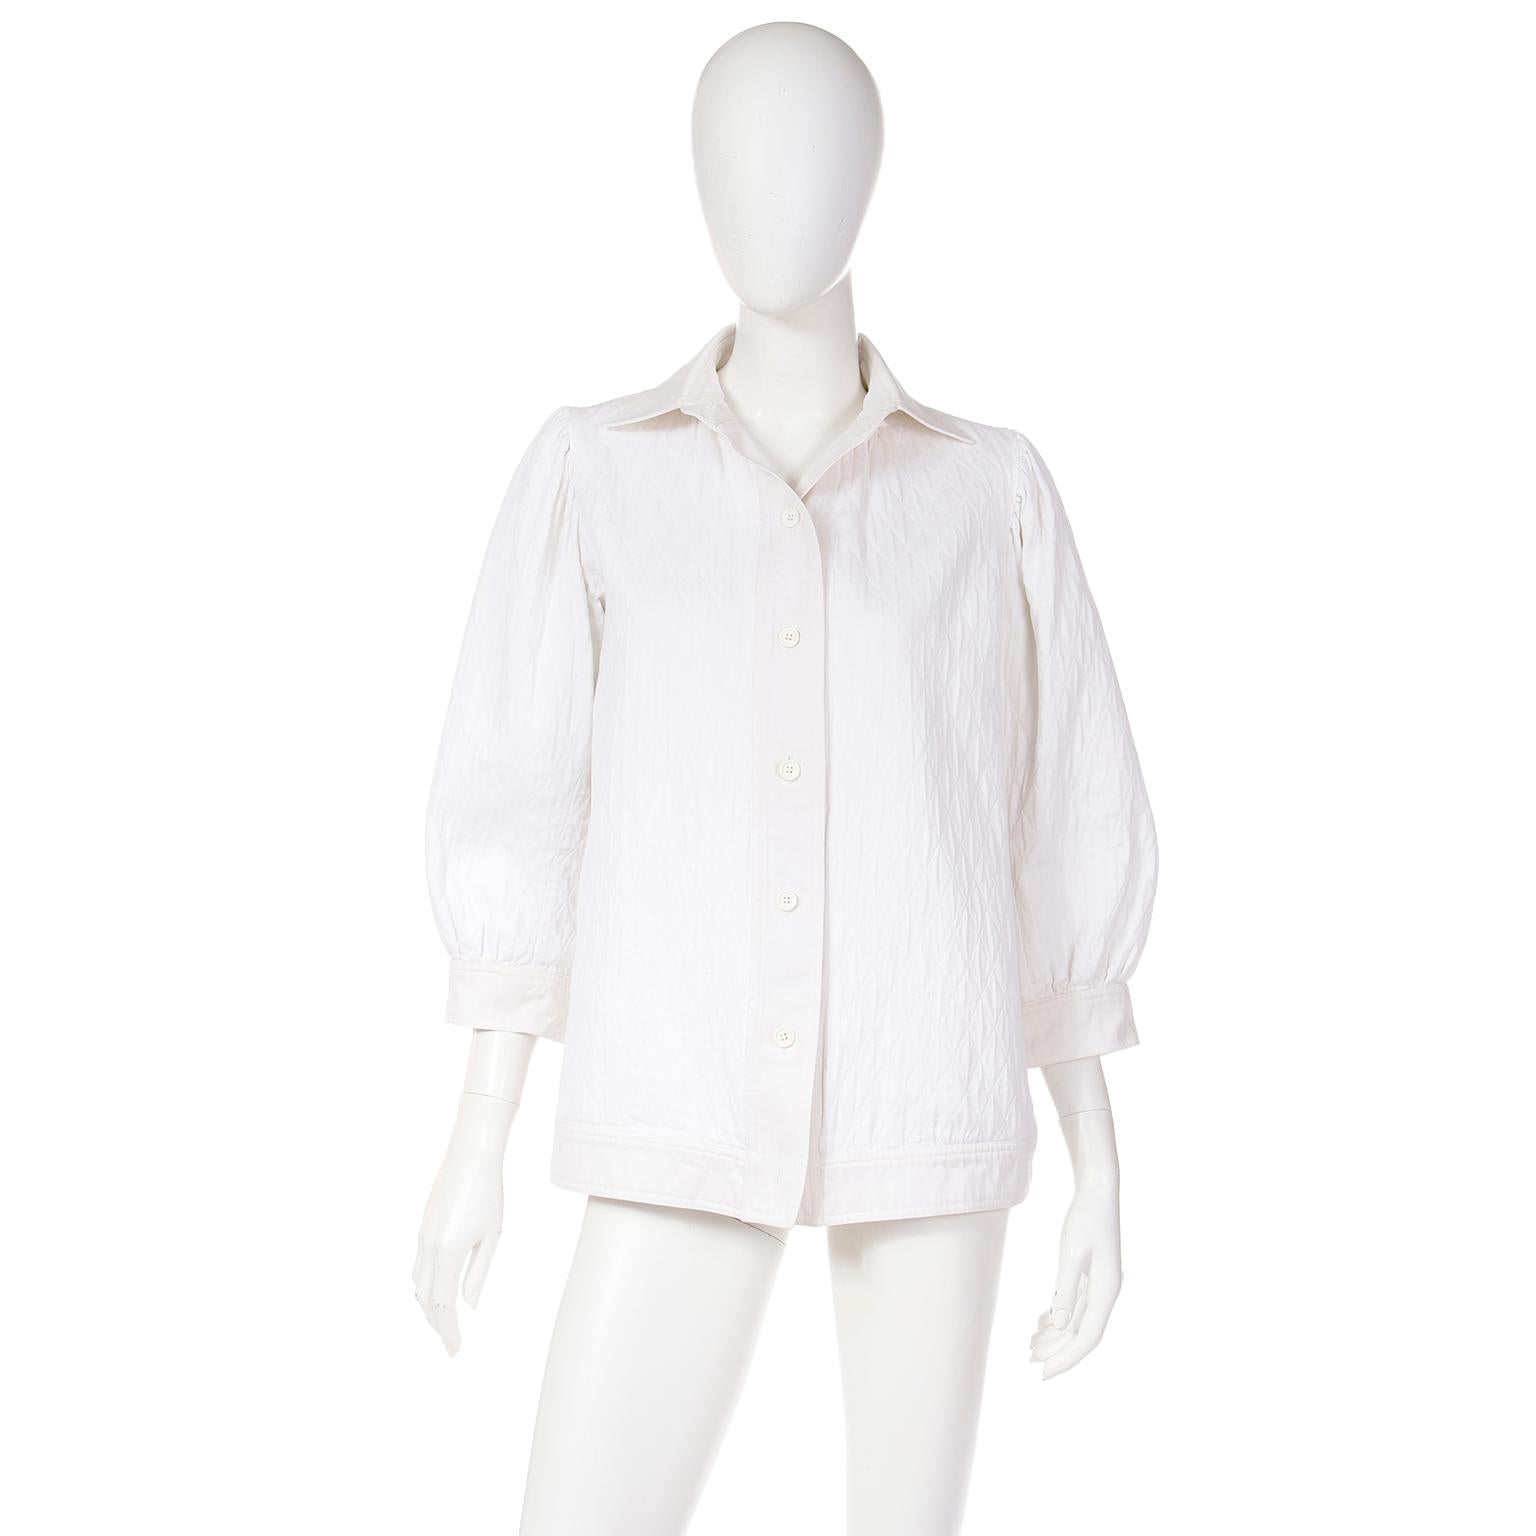 This is a rare 1970's Yves Saint Laurent Rive Gauche ivory quilted textured collared jacket. This jacket is in Yves Saint Laurent's signature smock style (without the usual patch pockets) and it would be a great addition to any wardrobe. You can